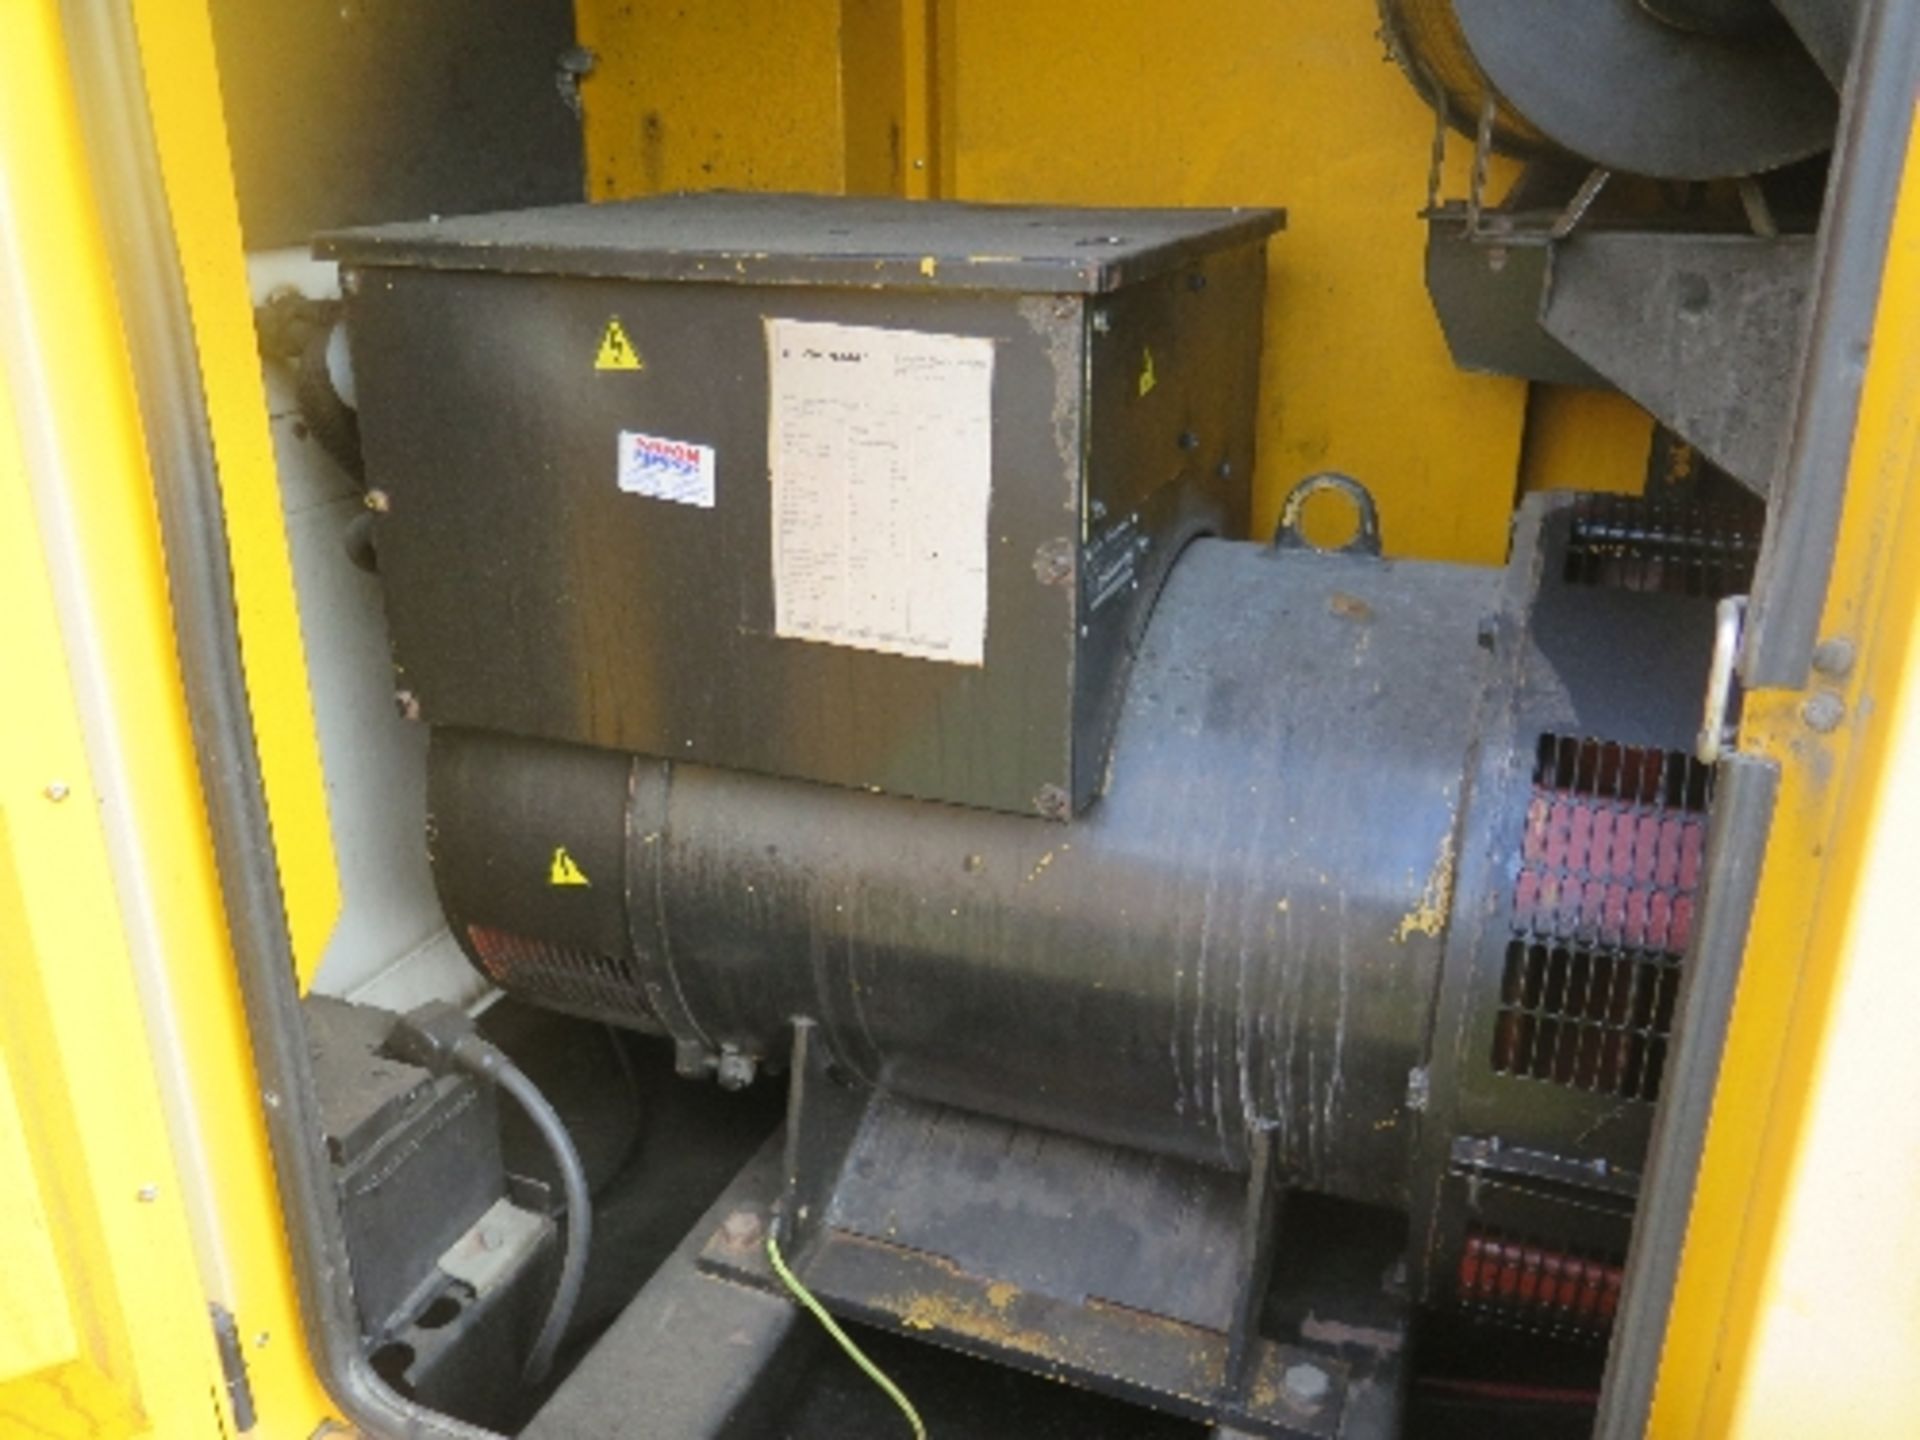 Caterpillar XQE200 generator 22896 hrs 157829
PERKINS - RUNS AND MAKES POWER
ALL LOTS are SOLD - Image 6 of 7